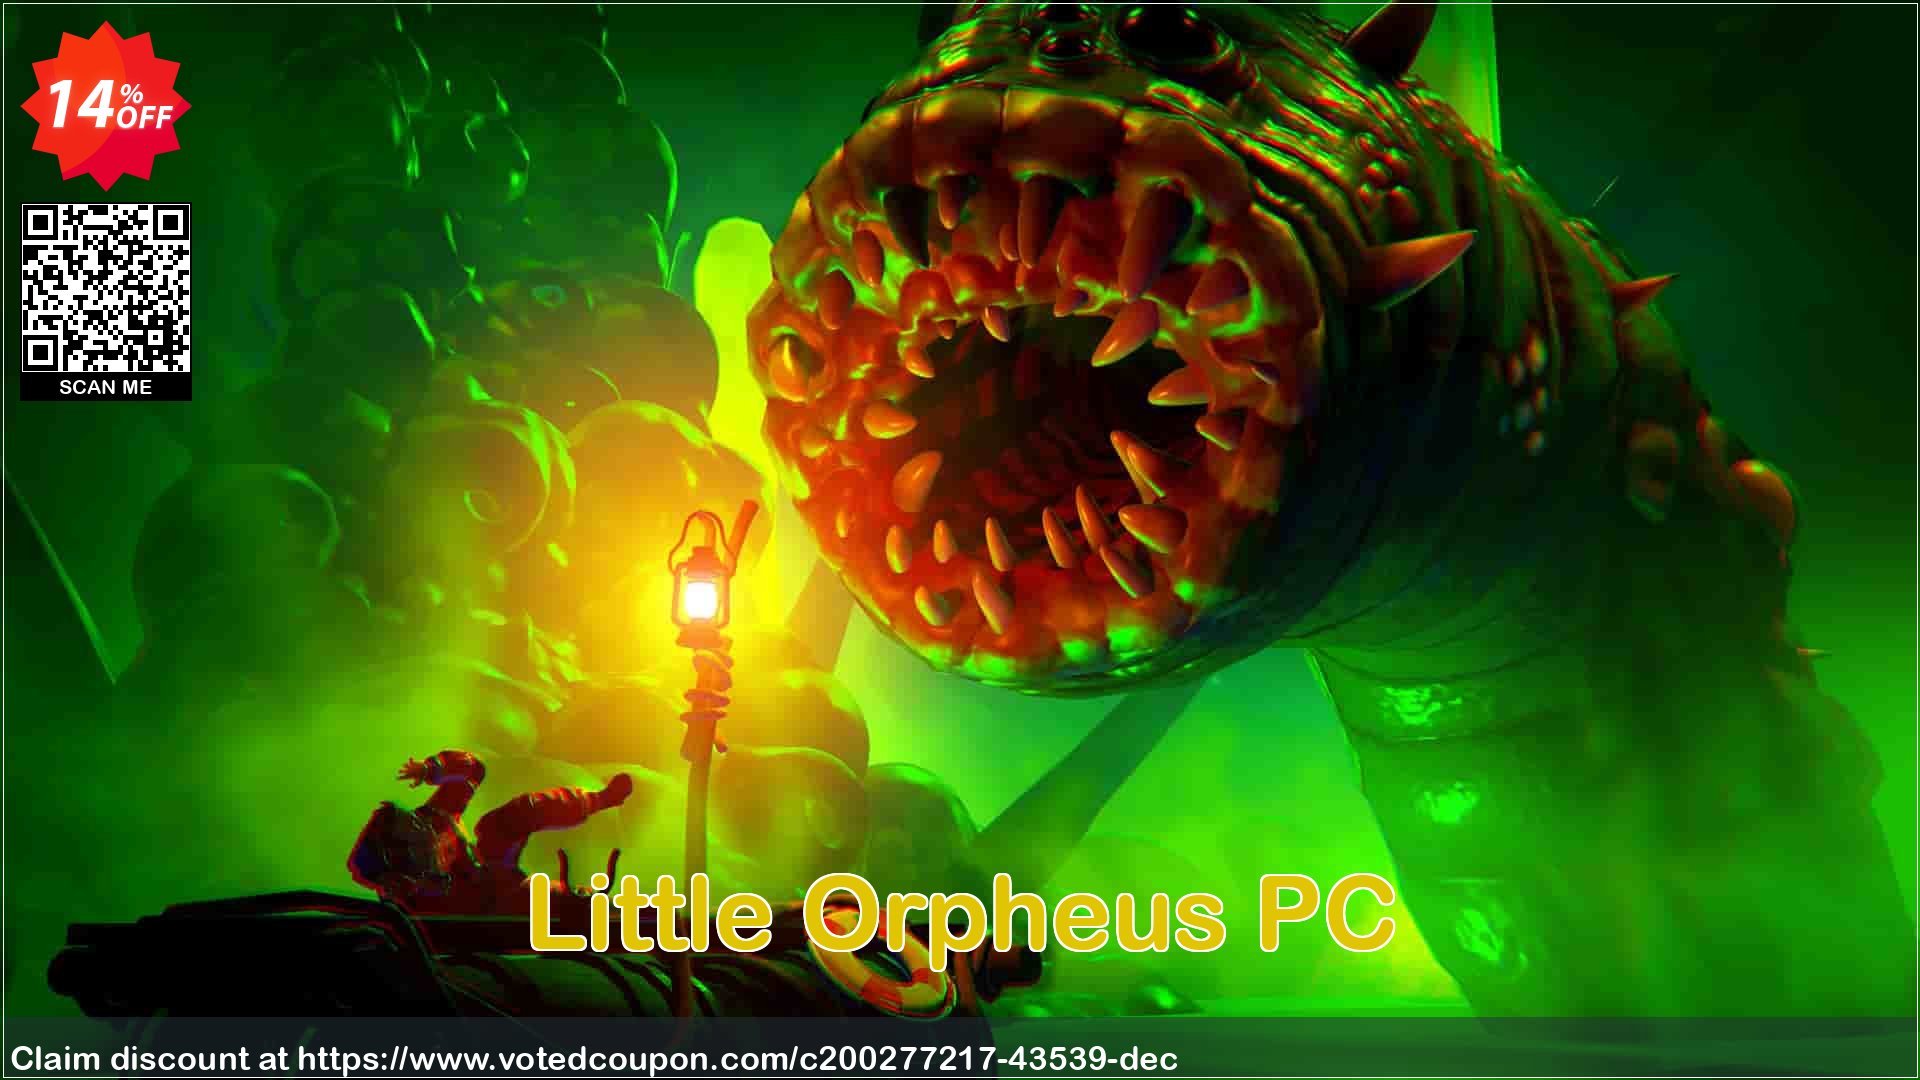 Little Orpheus PC Coupon Code May 2024, 14% OFF - VotedCoupon